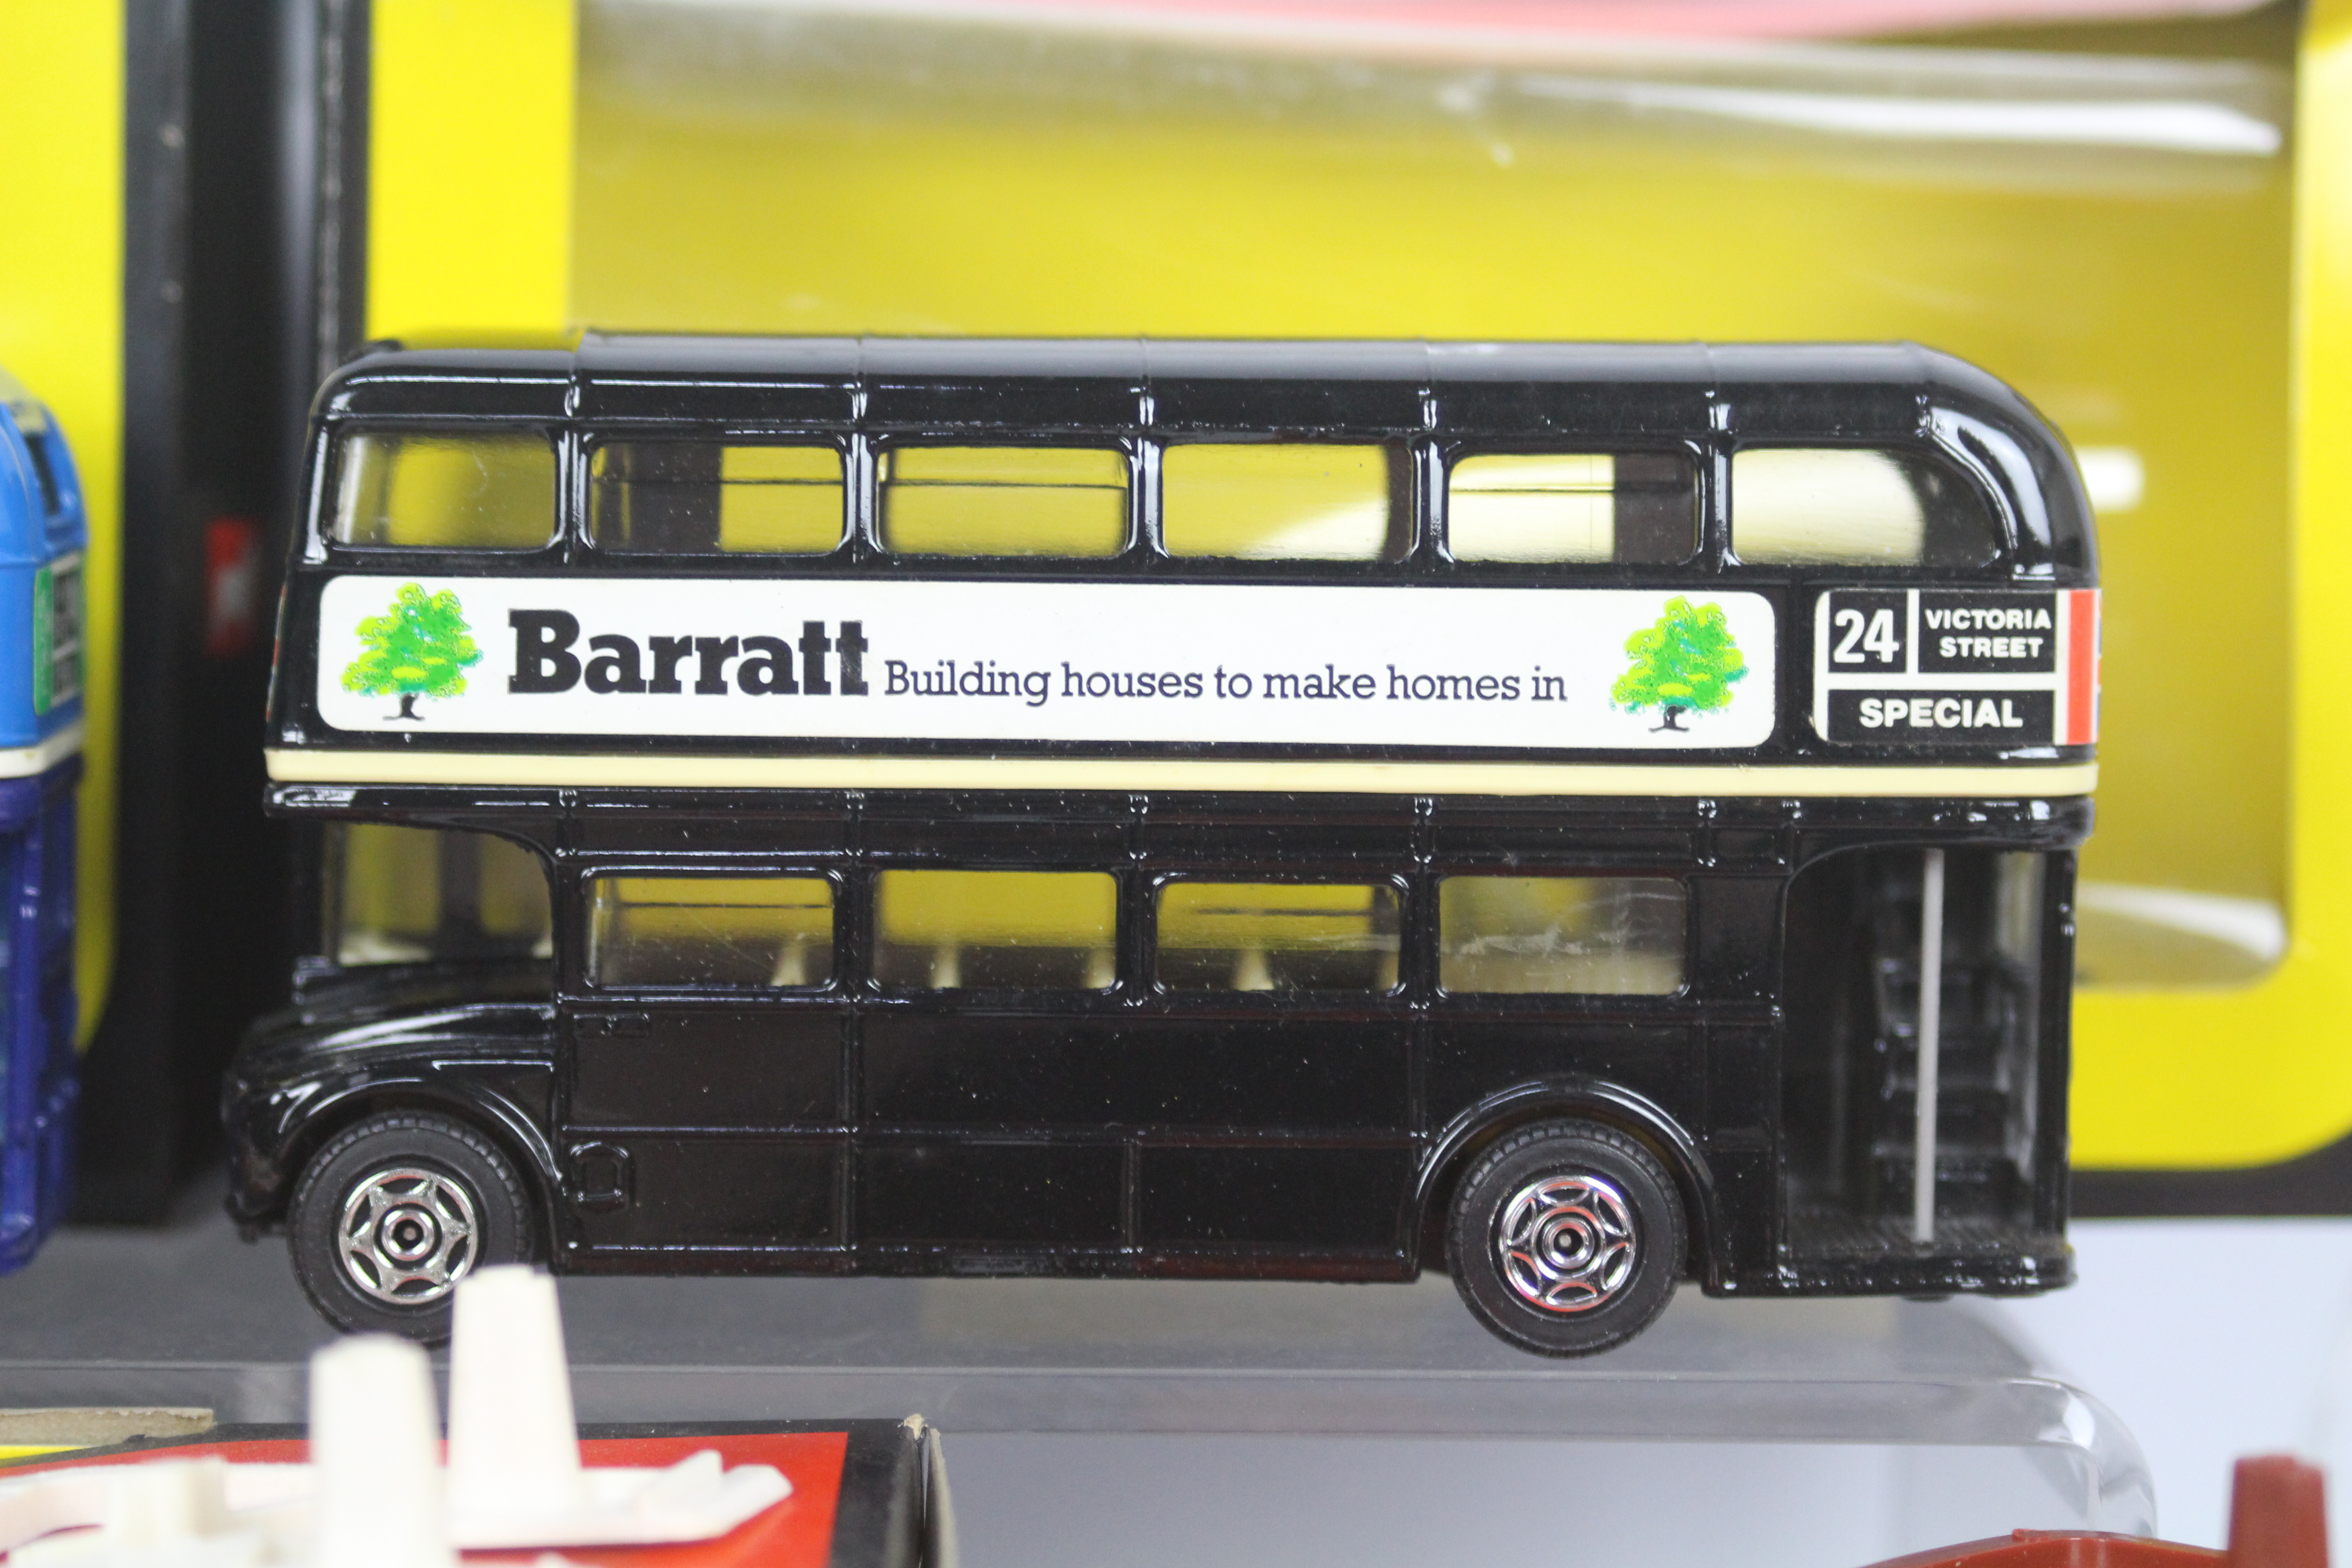 Corgi - 5 x boxed # 469 Routemaster bus models, several of which are unusual. - Image 6 of 6